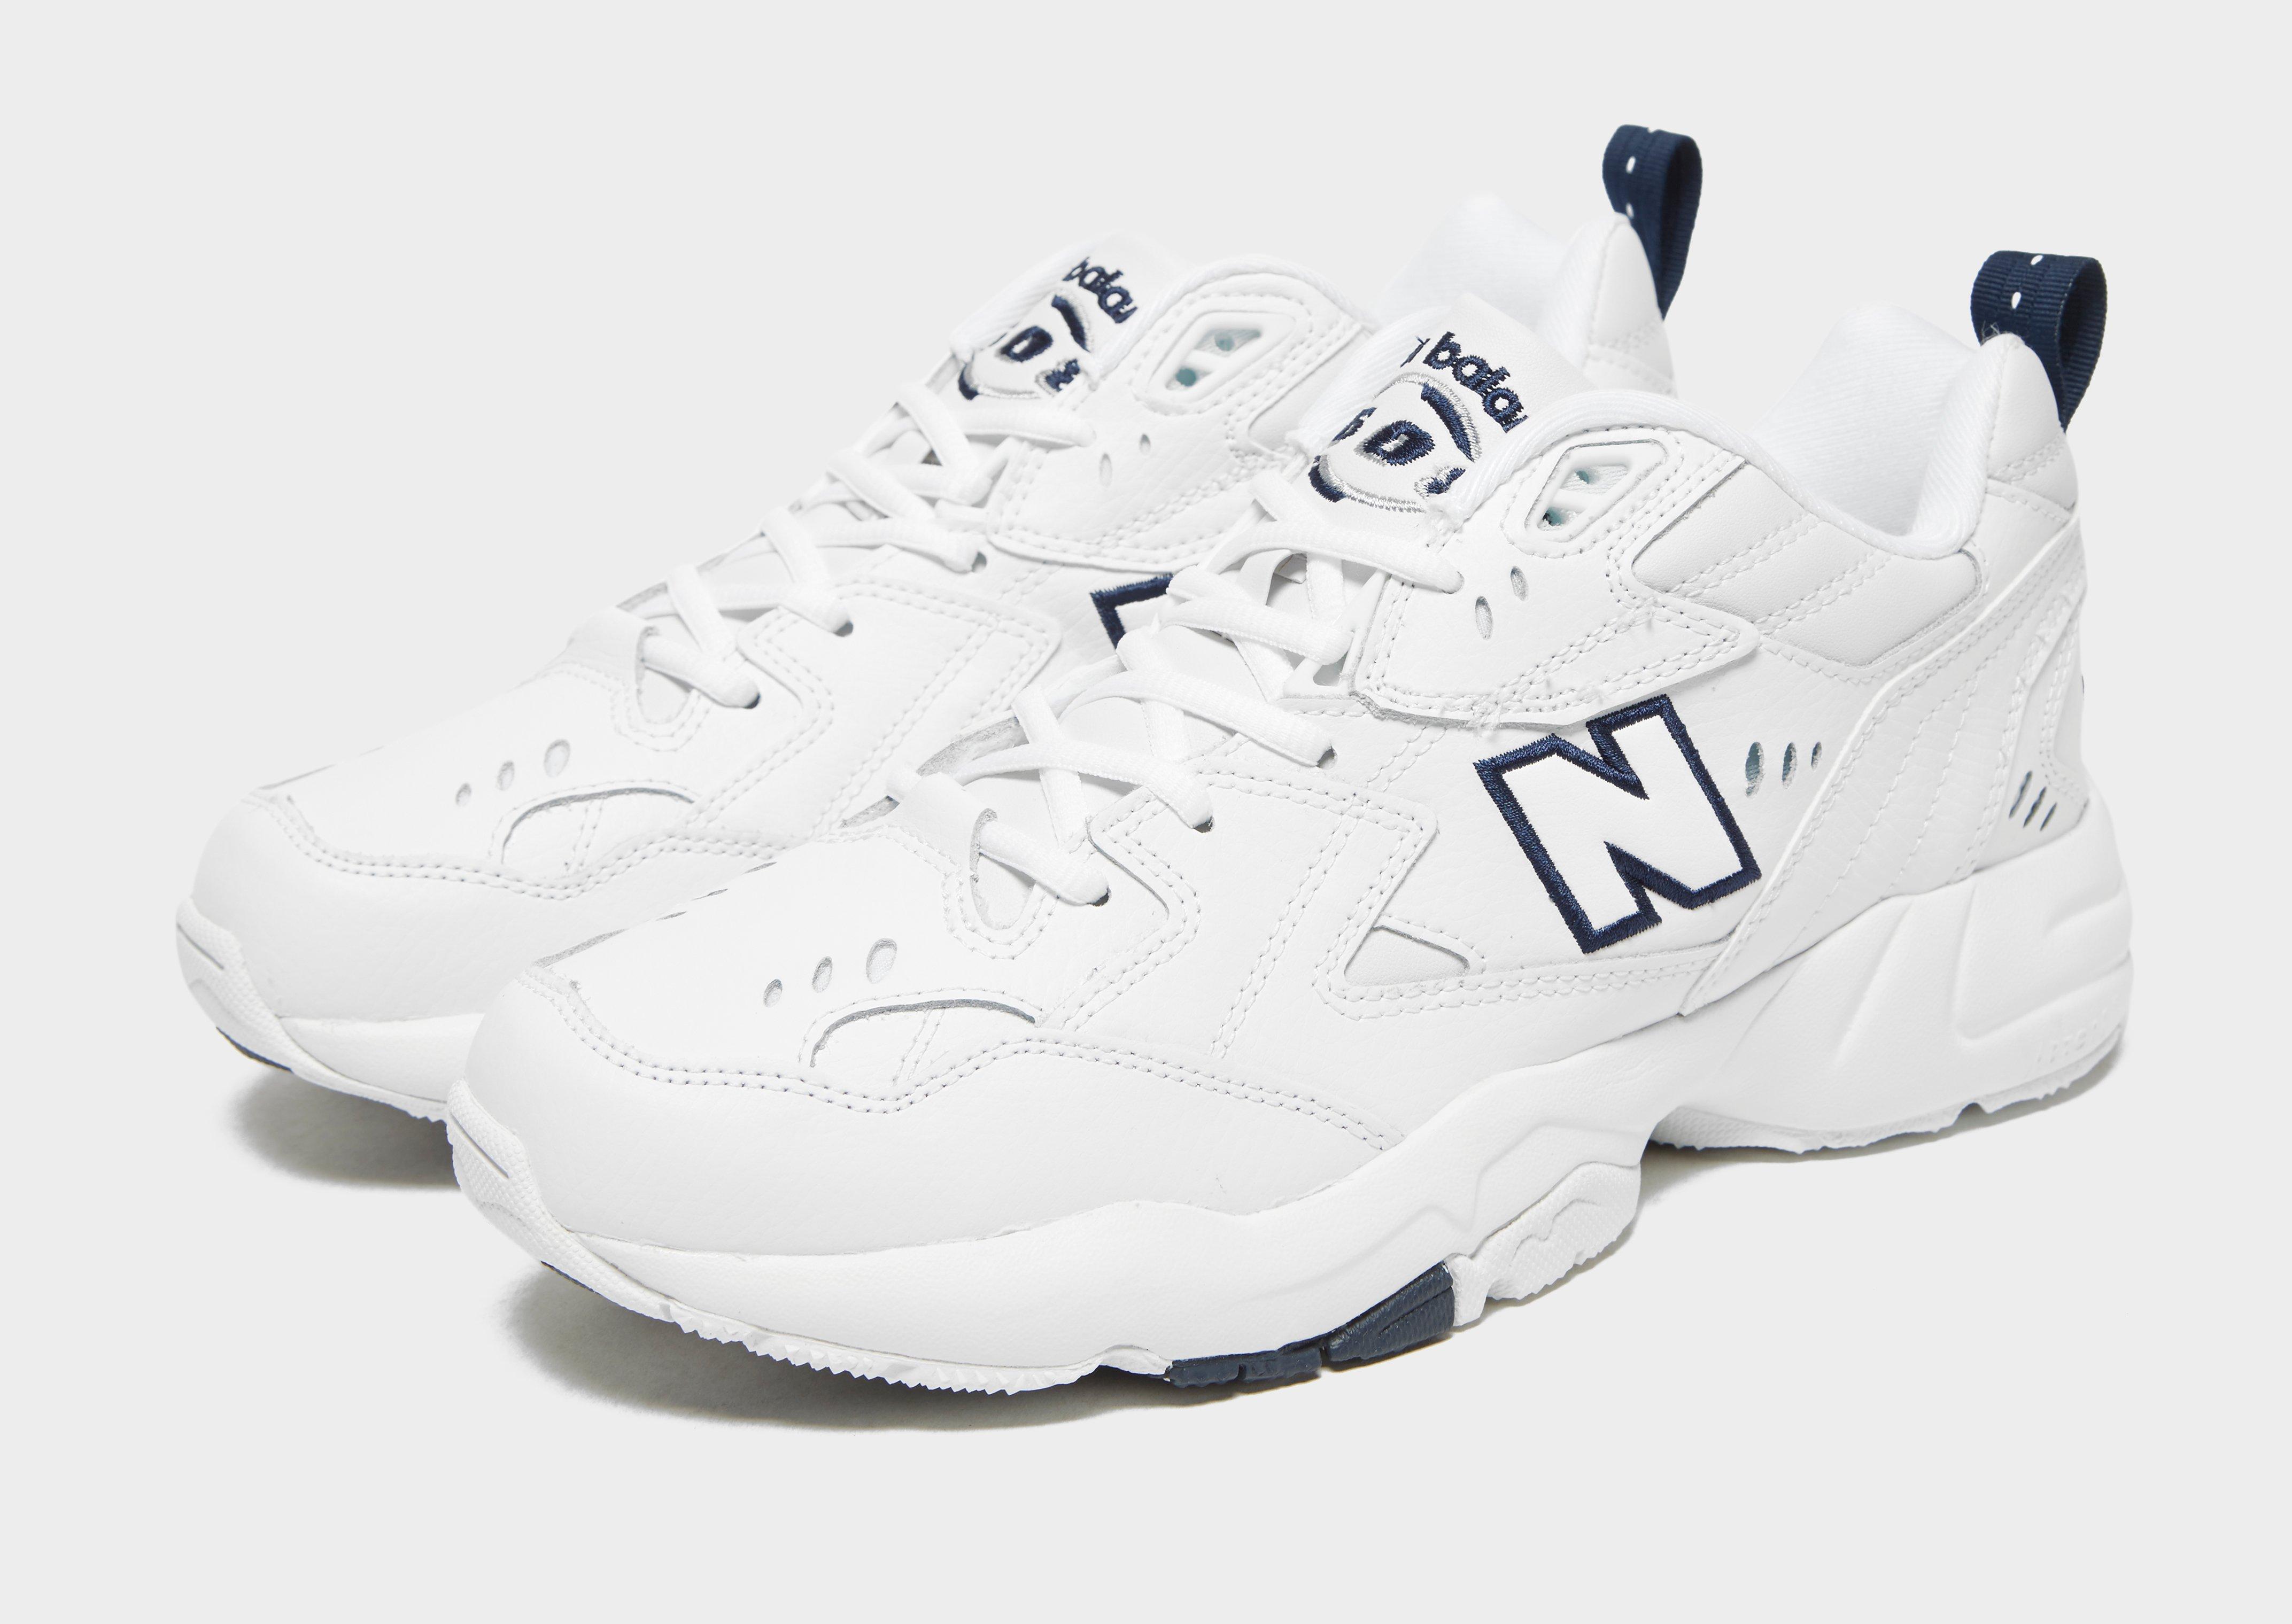 New Balance Leather 608 in White/Blue (White) for Men - Lyst